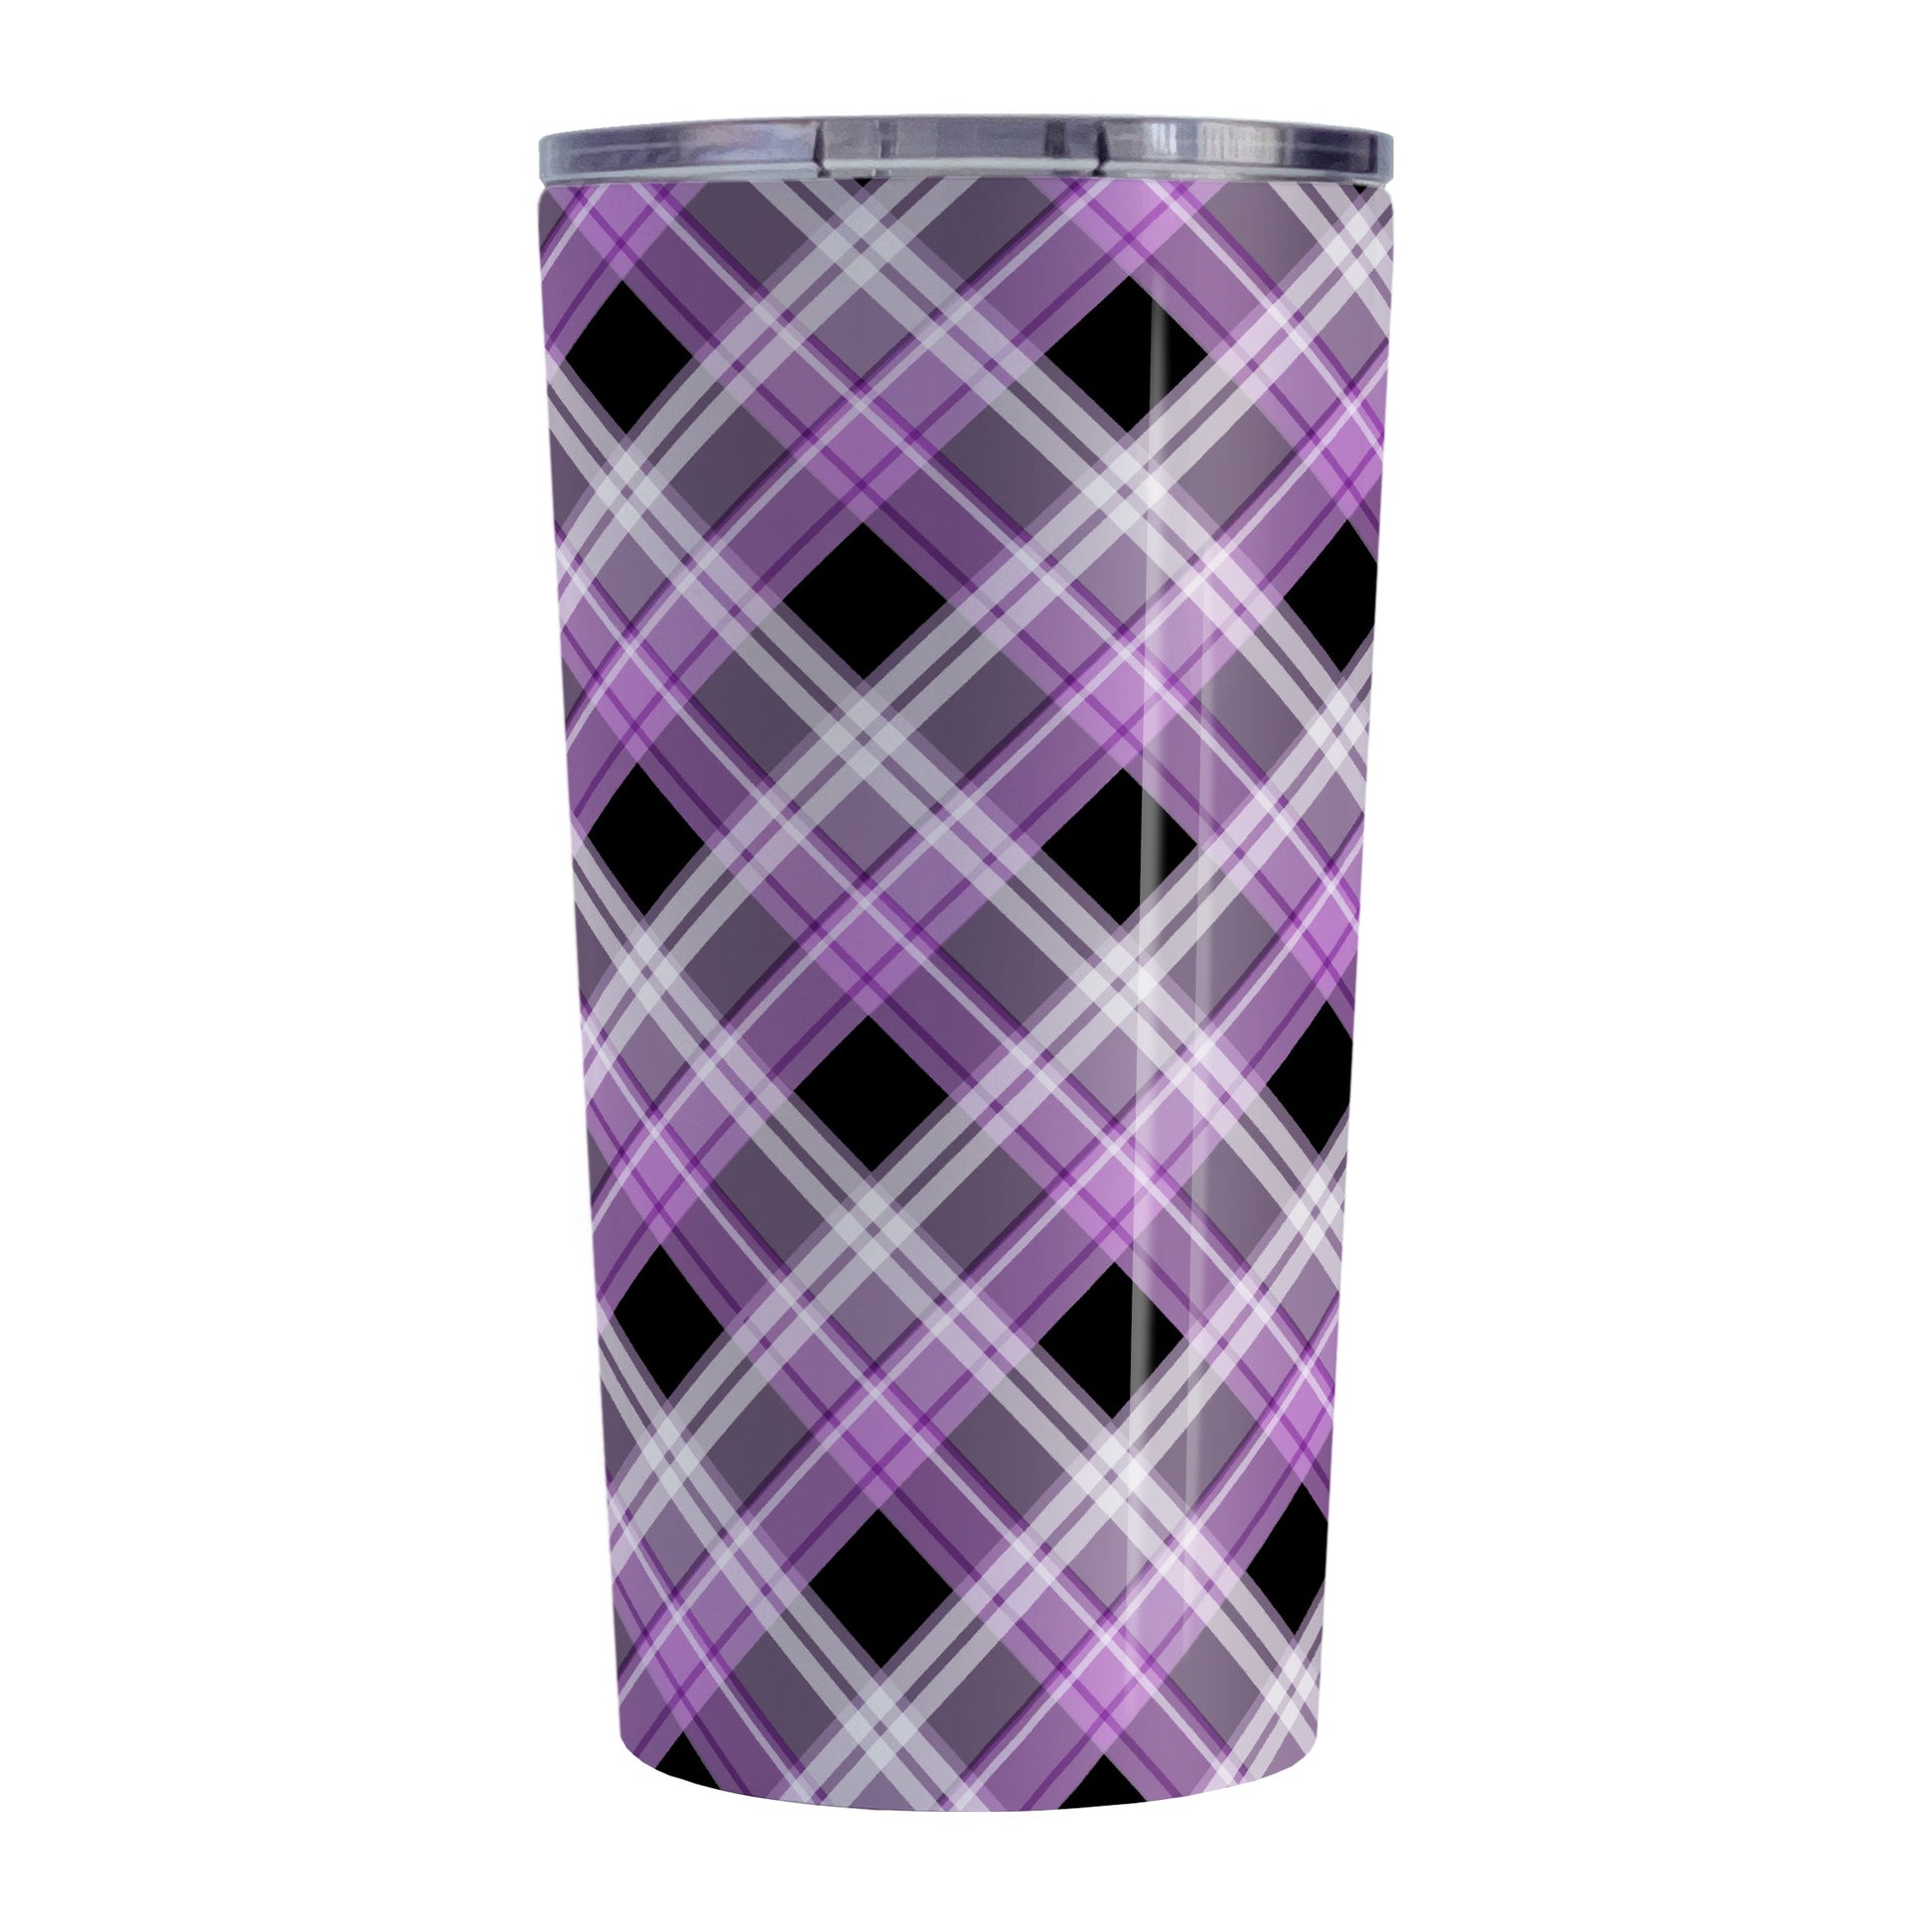 Alternative Black and Purple Plaid Tumbler Cup (20oz, stainless steel insulated) at Amy's Coffee Mugs. A tumbler cup designed with a diagonal purple, black, and white plaid pattern that wraps around the insulated tumbler cup.  A heavy-duty tumbler designed for someone who loves plaid patterns and the colors purple and black.